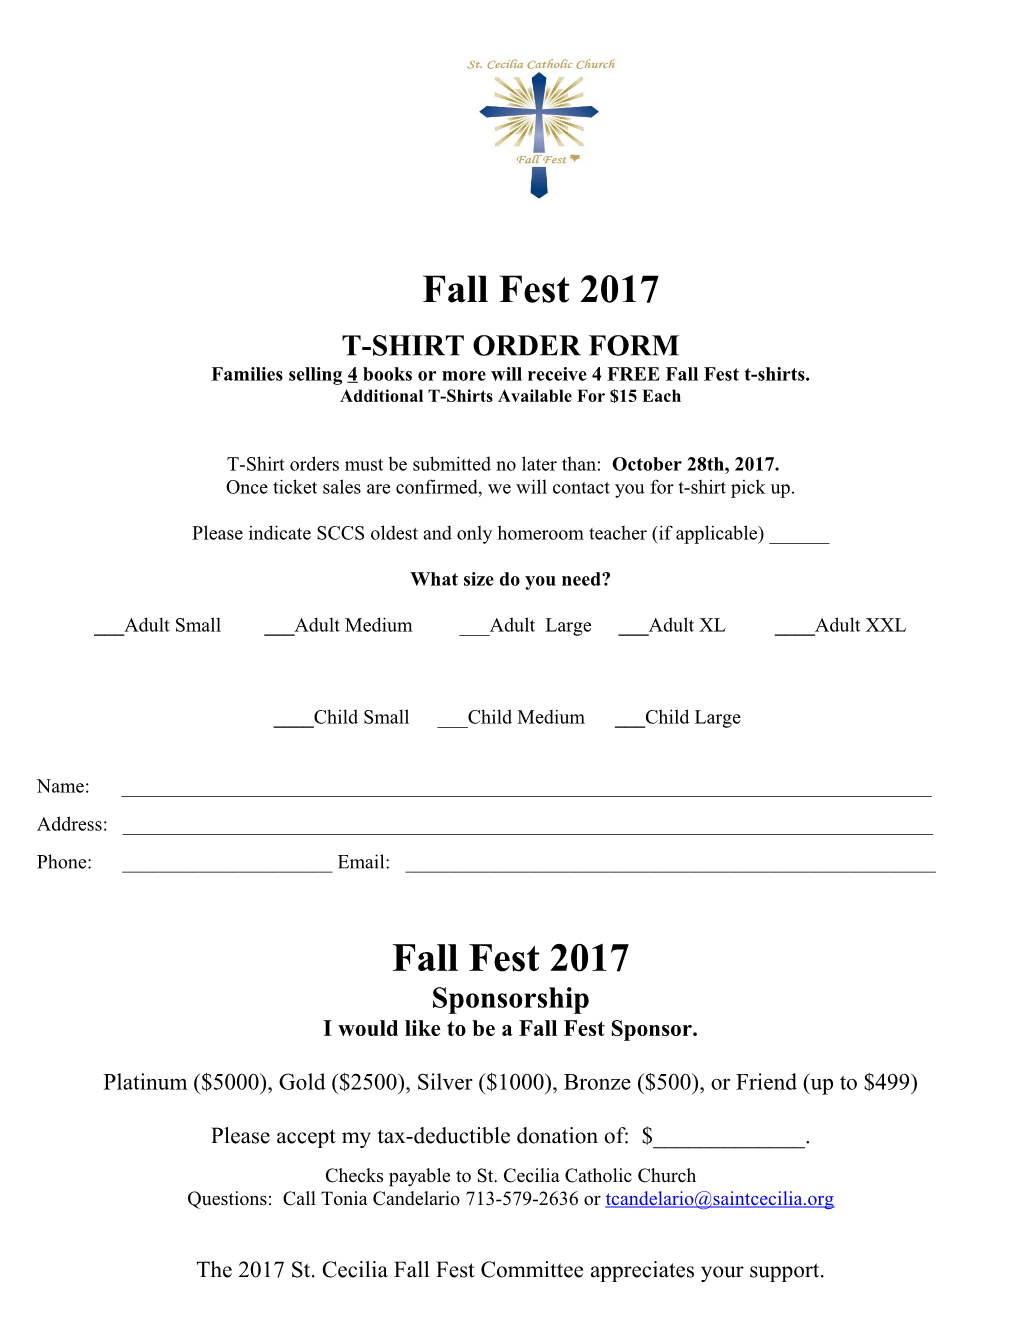 Families Selling 4 Books Or More Will Receive 4 FREE Fall Fest T-Shirts